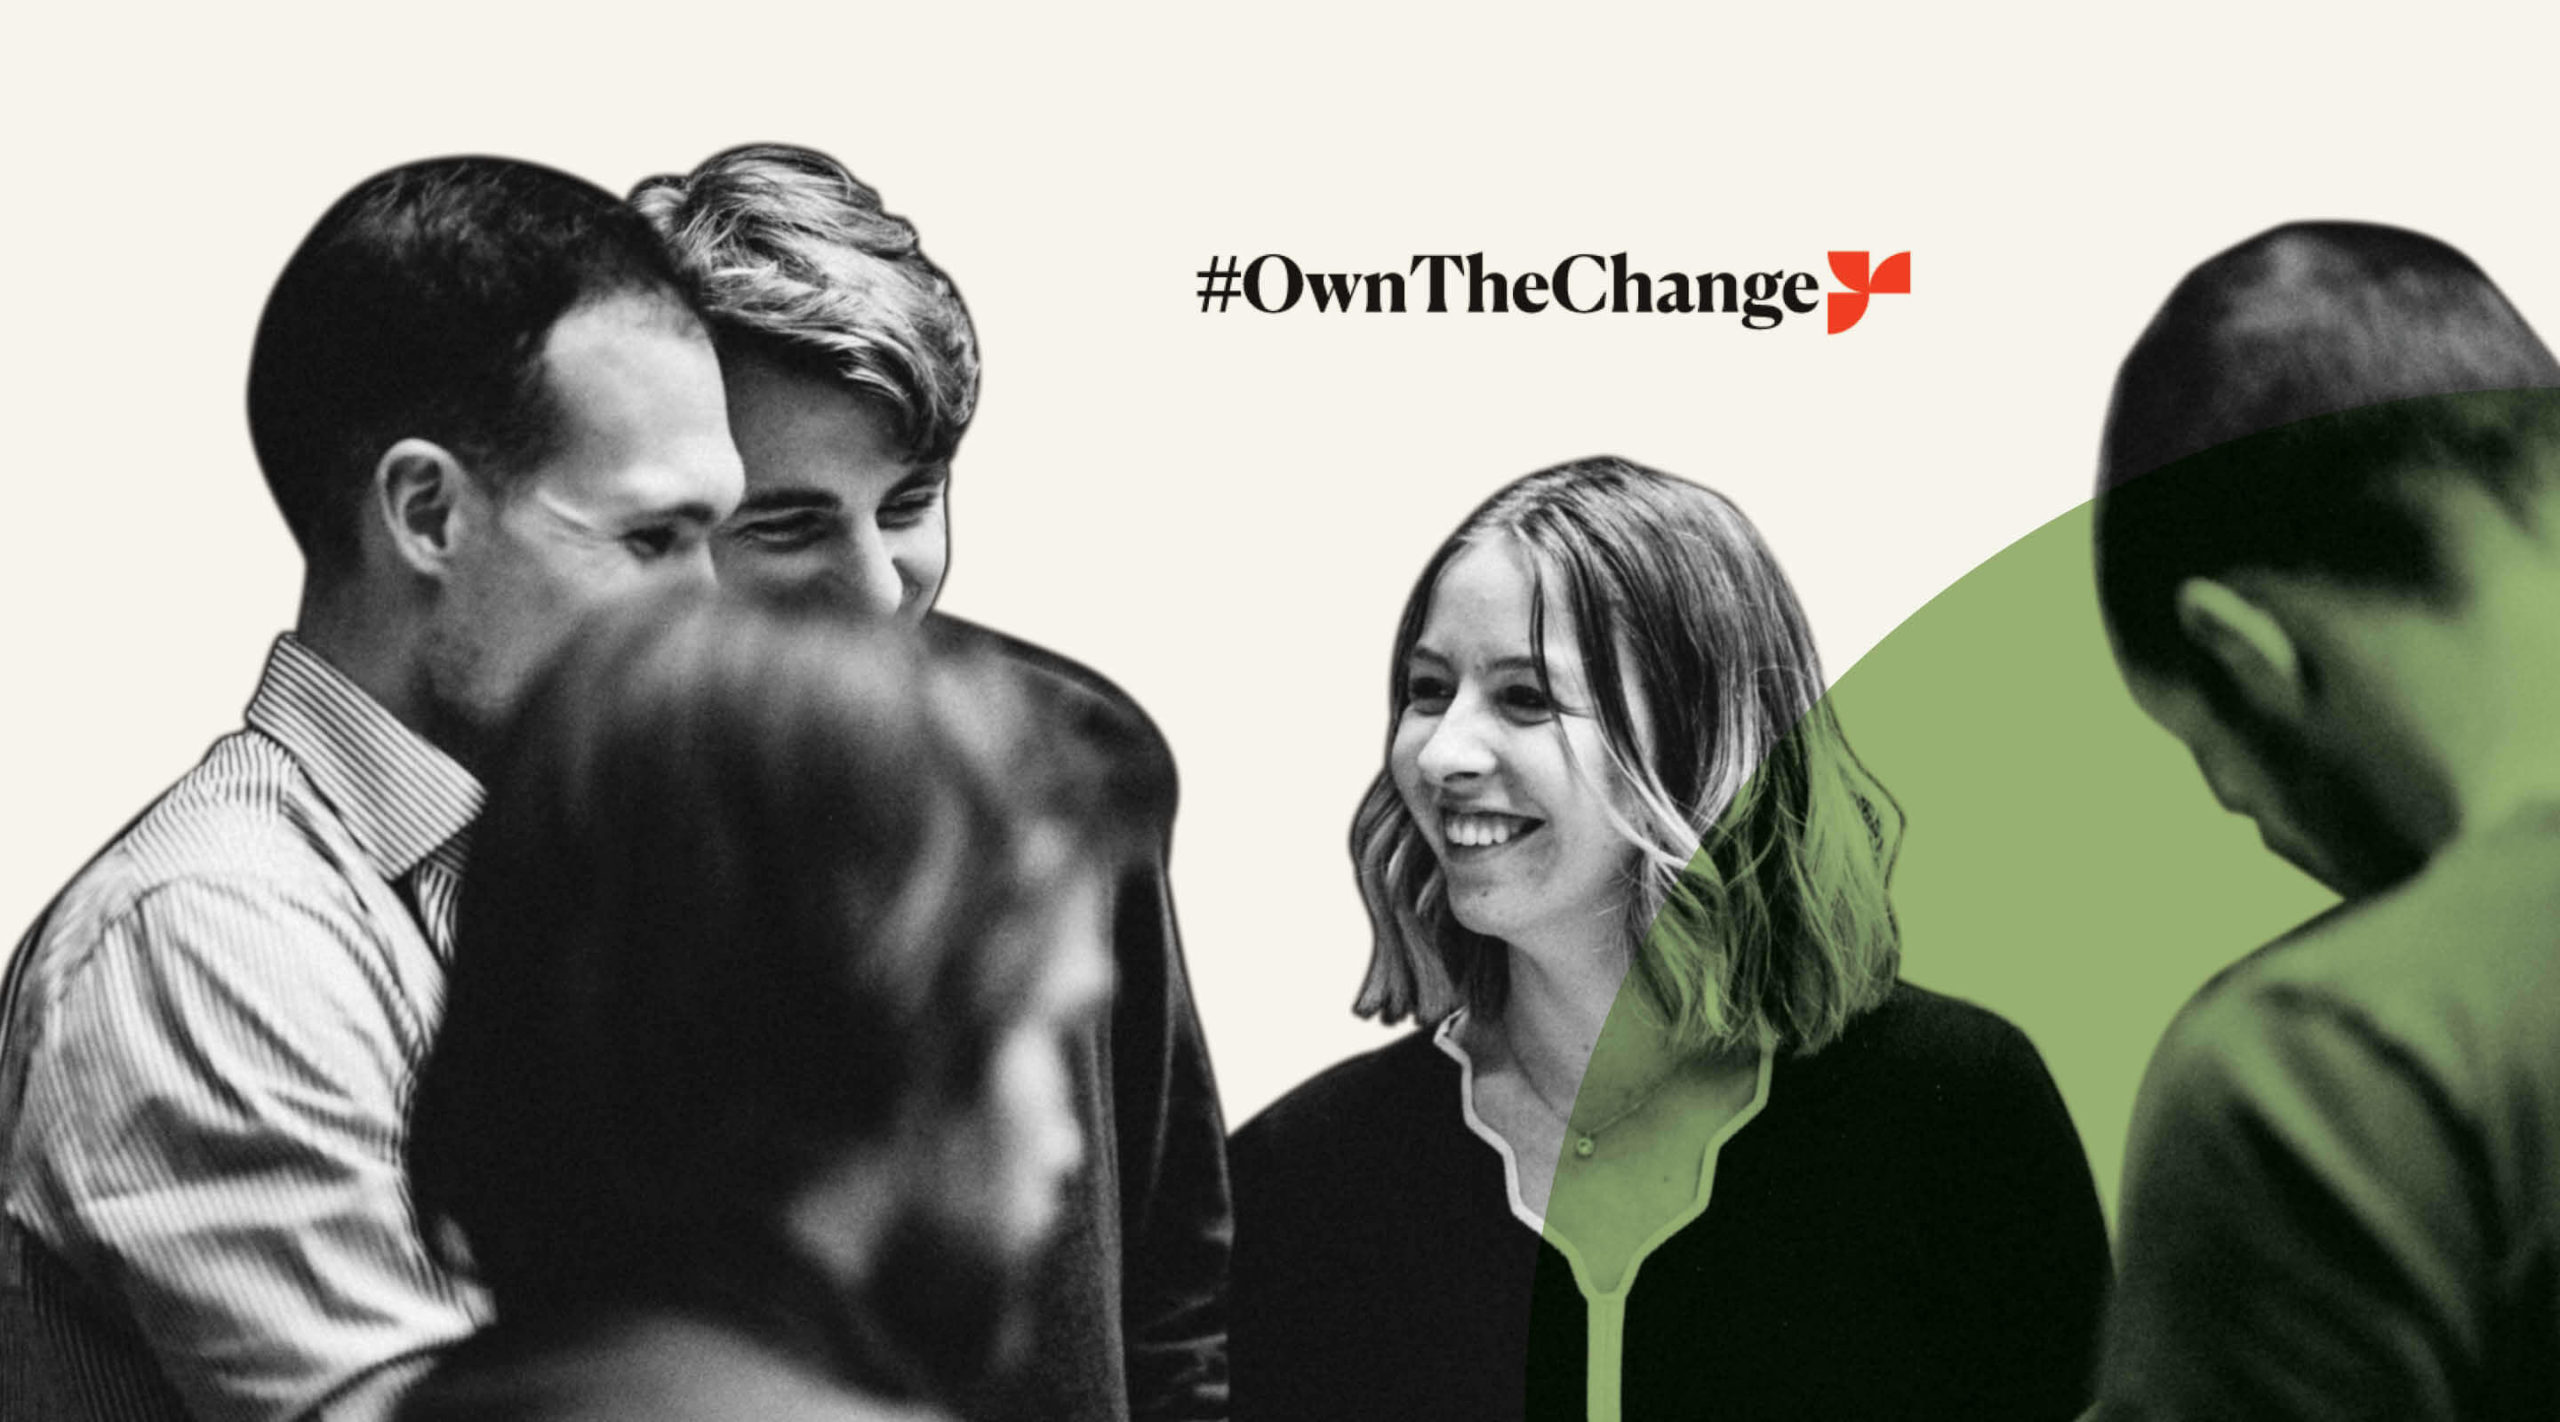 #OwnTheChange – Crowdinvesting kommt bald…